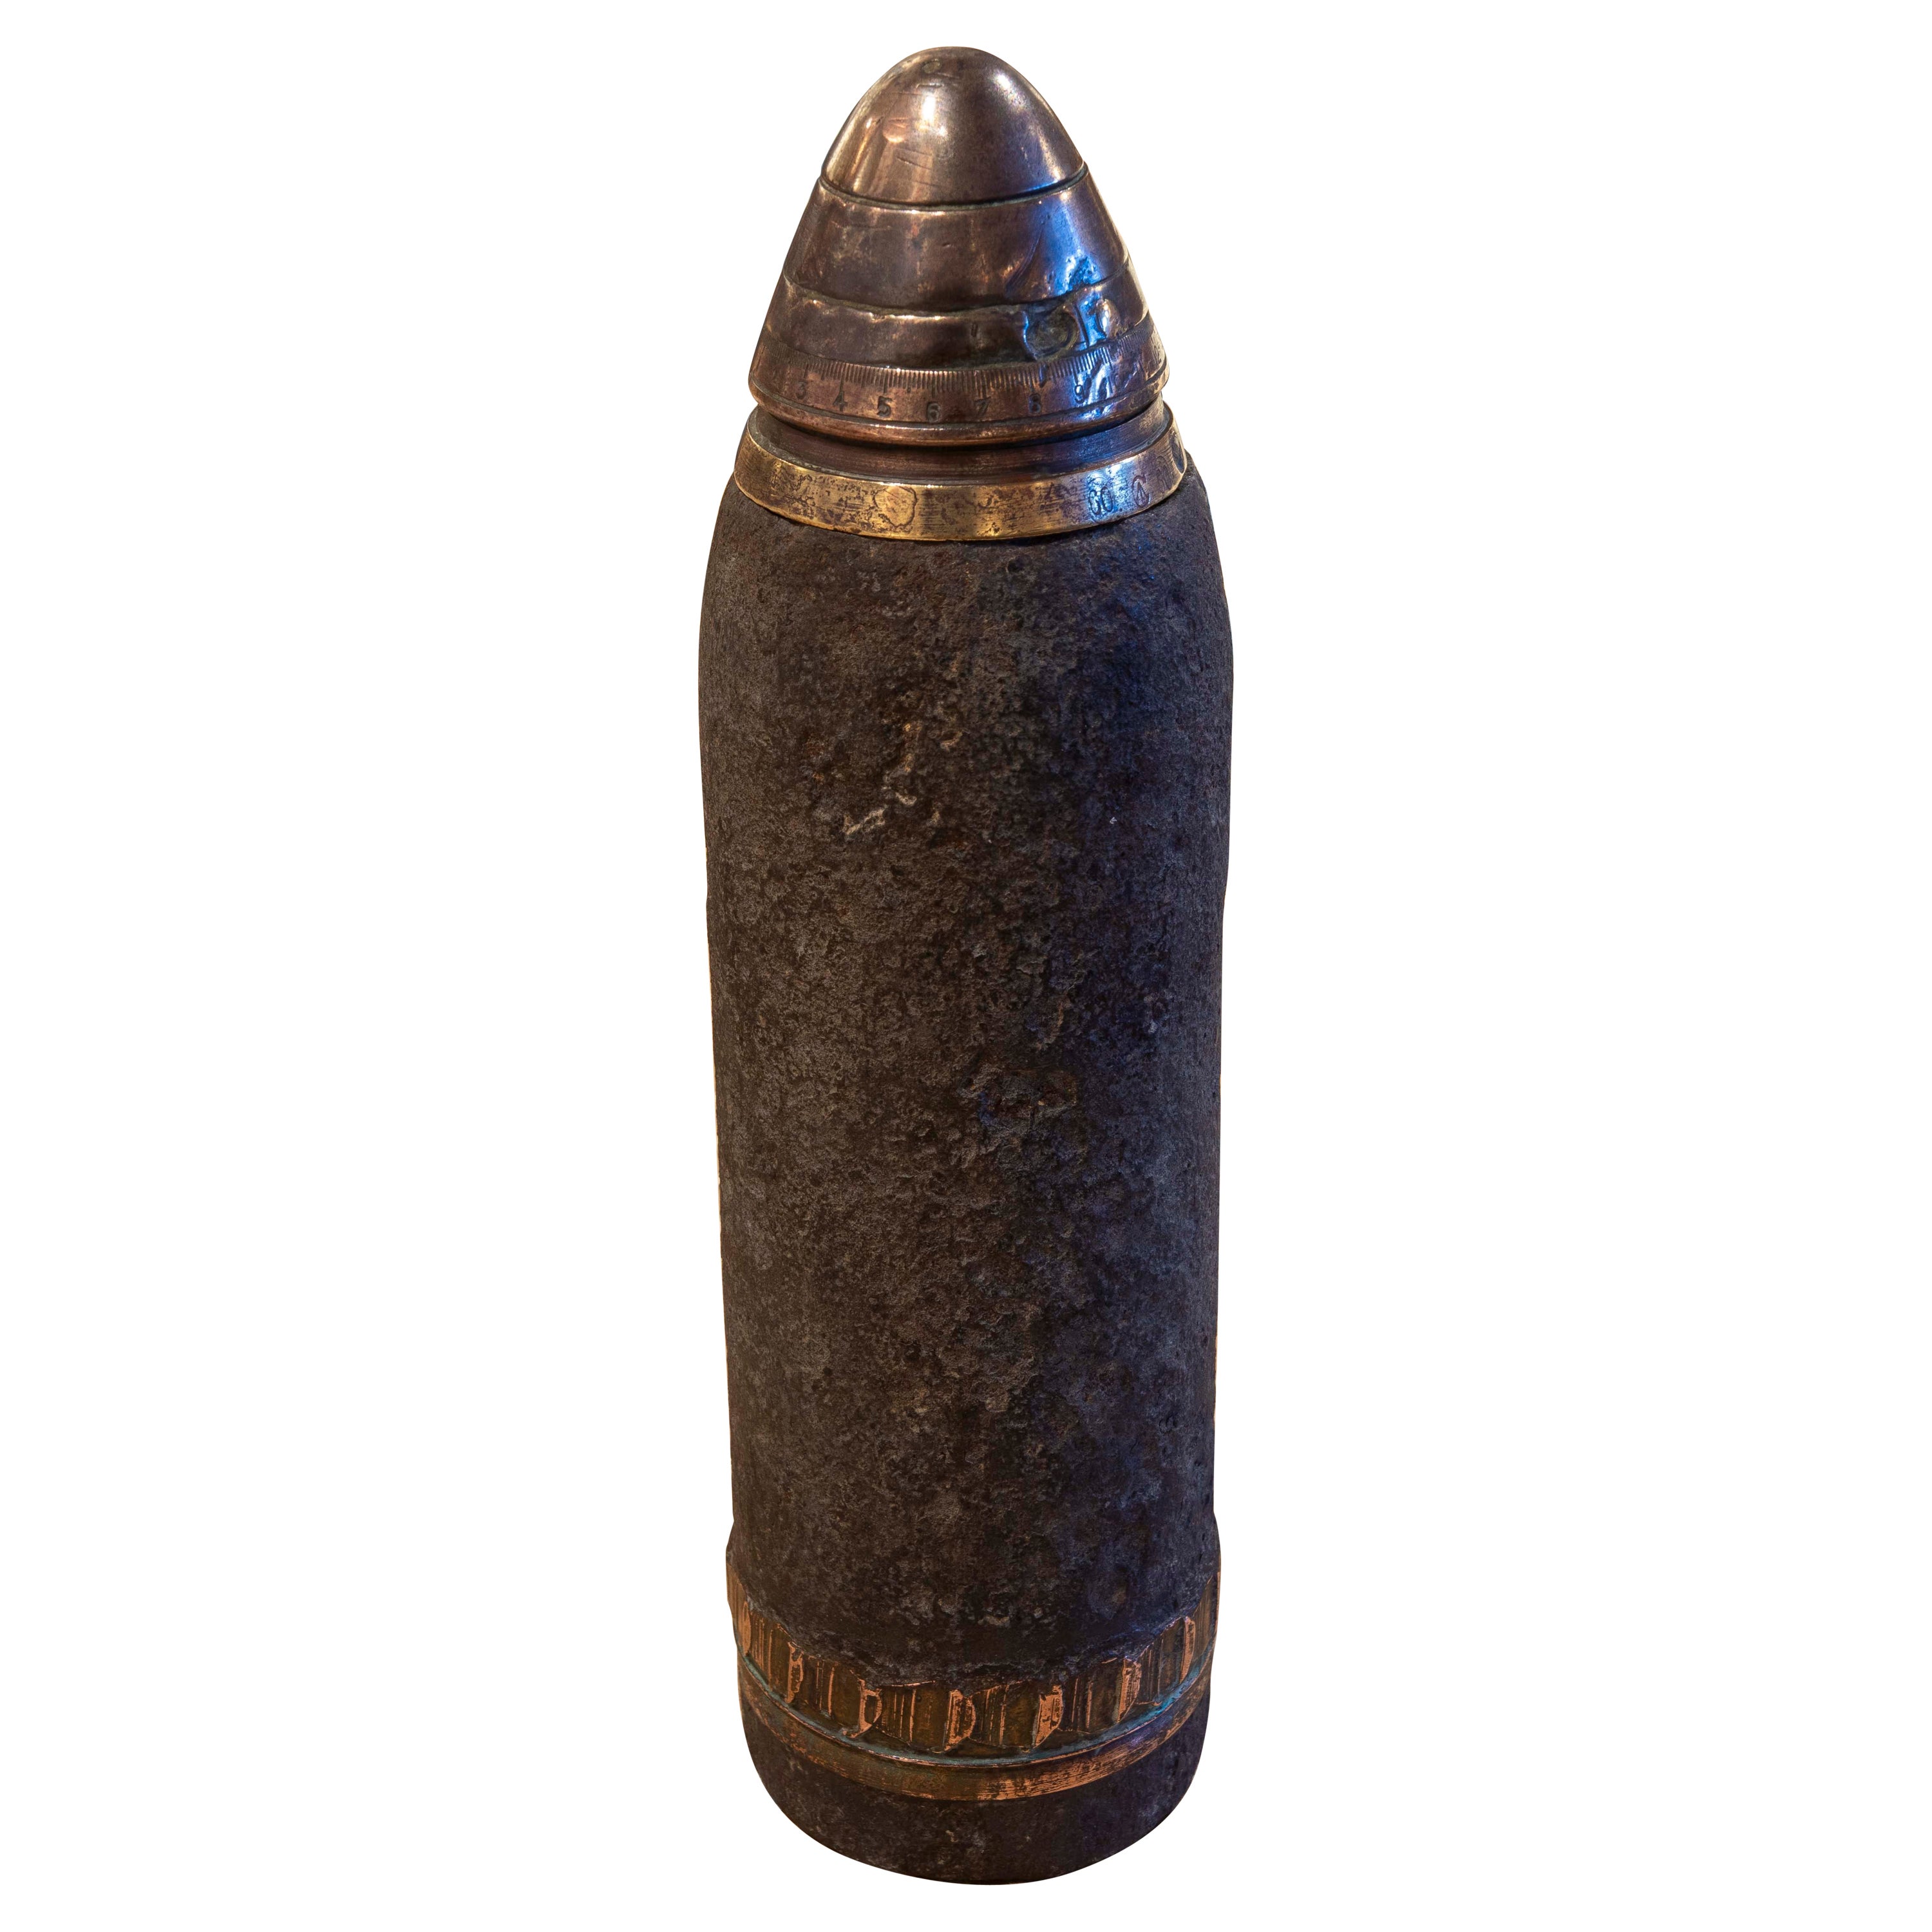 Sculpture of Bullet Projectile with Cover on Top For Sale